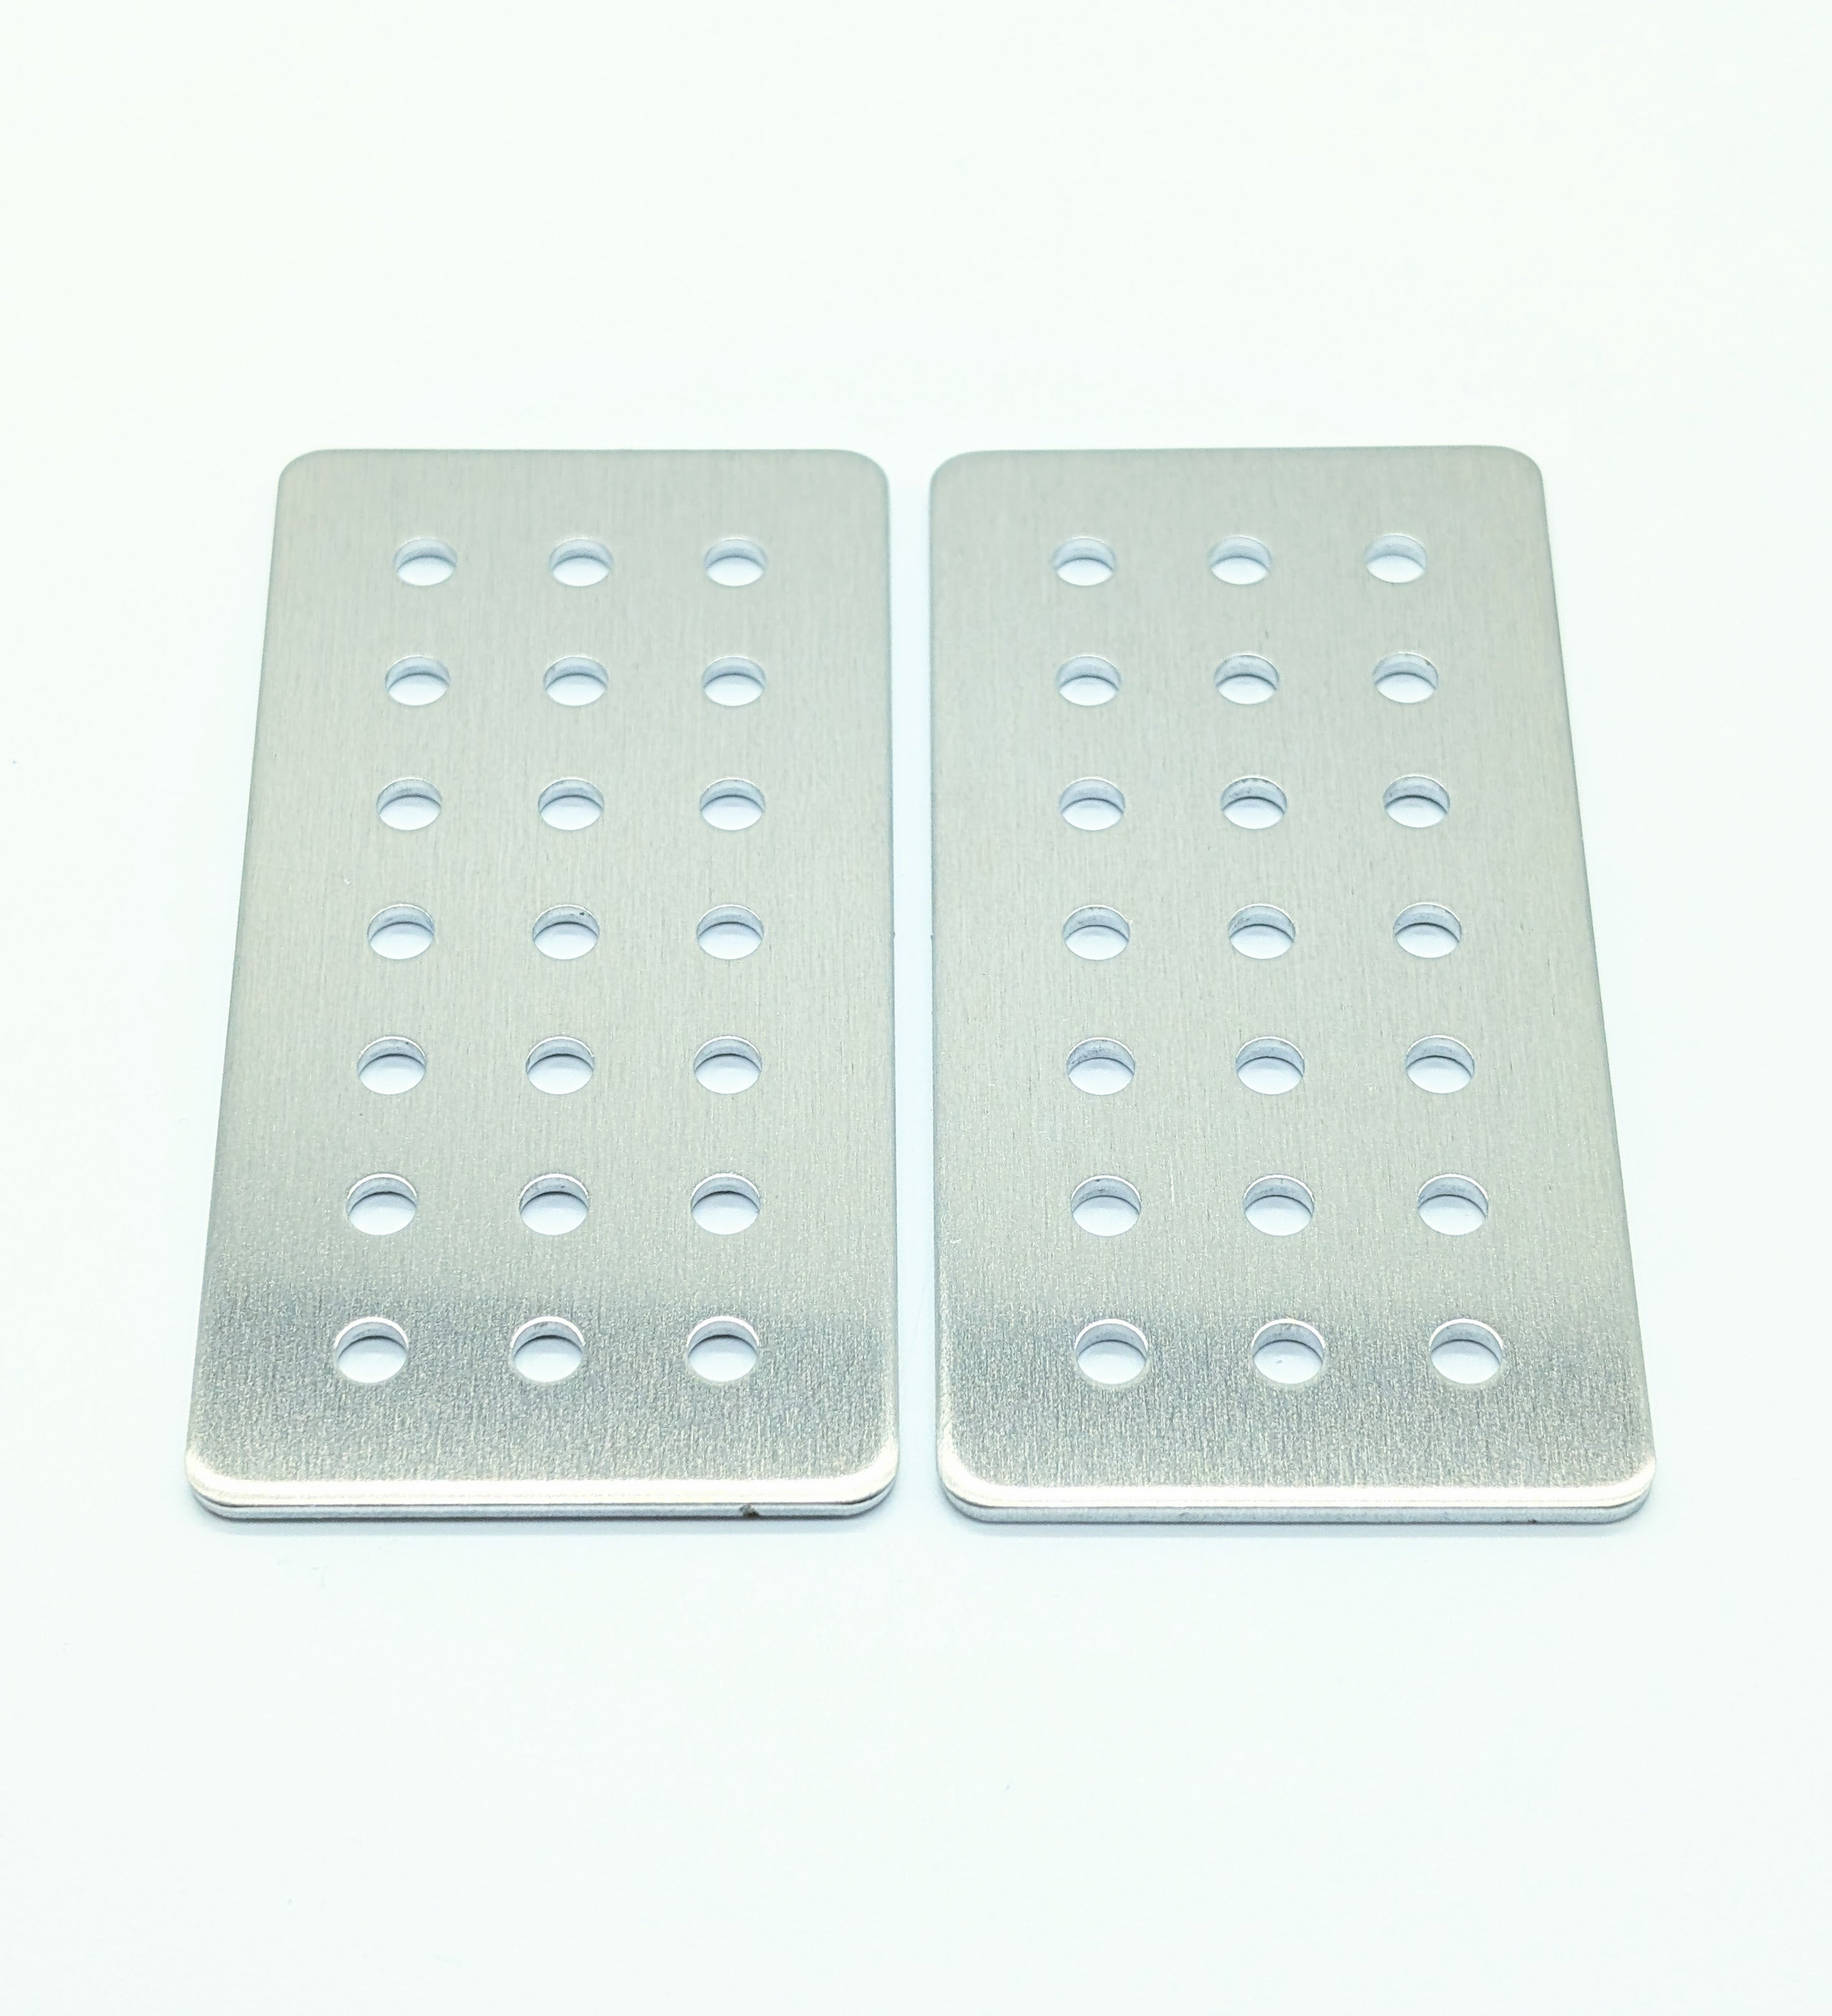 QTY 2 - Aluminum Grid Pattern Joiner Gussets - 5mm Hole Size